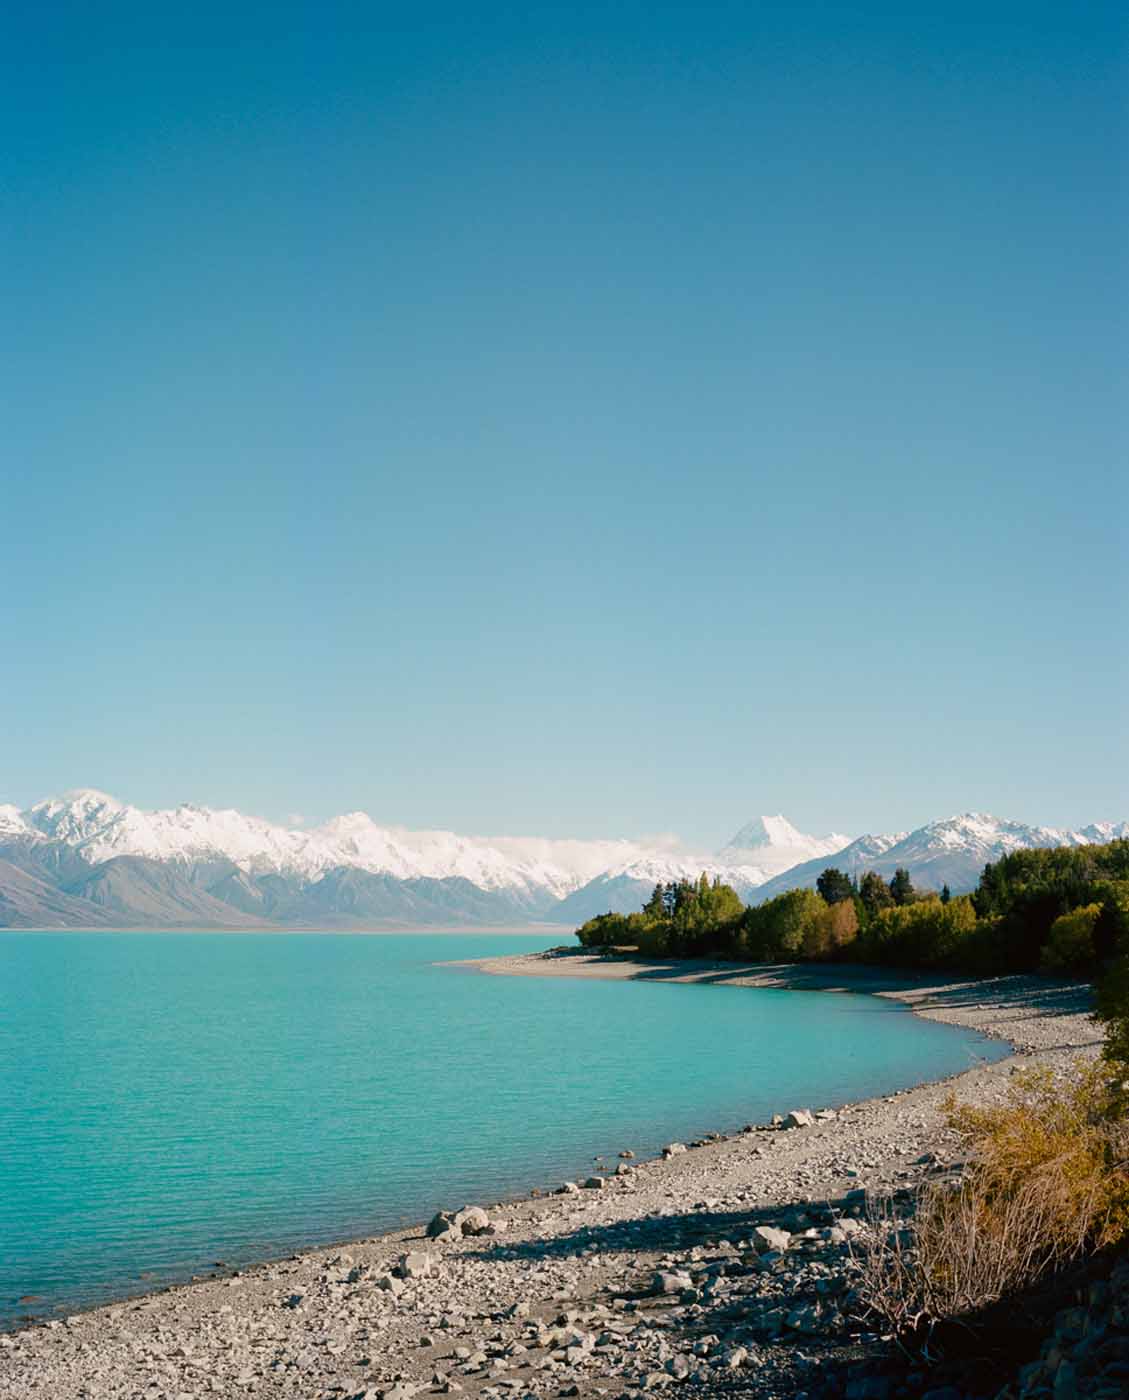 Mt. Cook | New Zealand | Photo: Grant Monahan